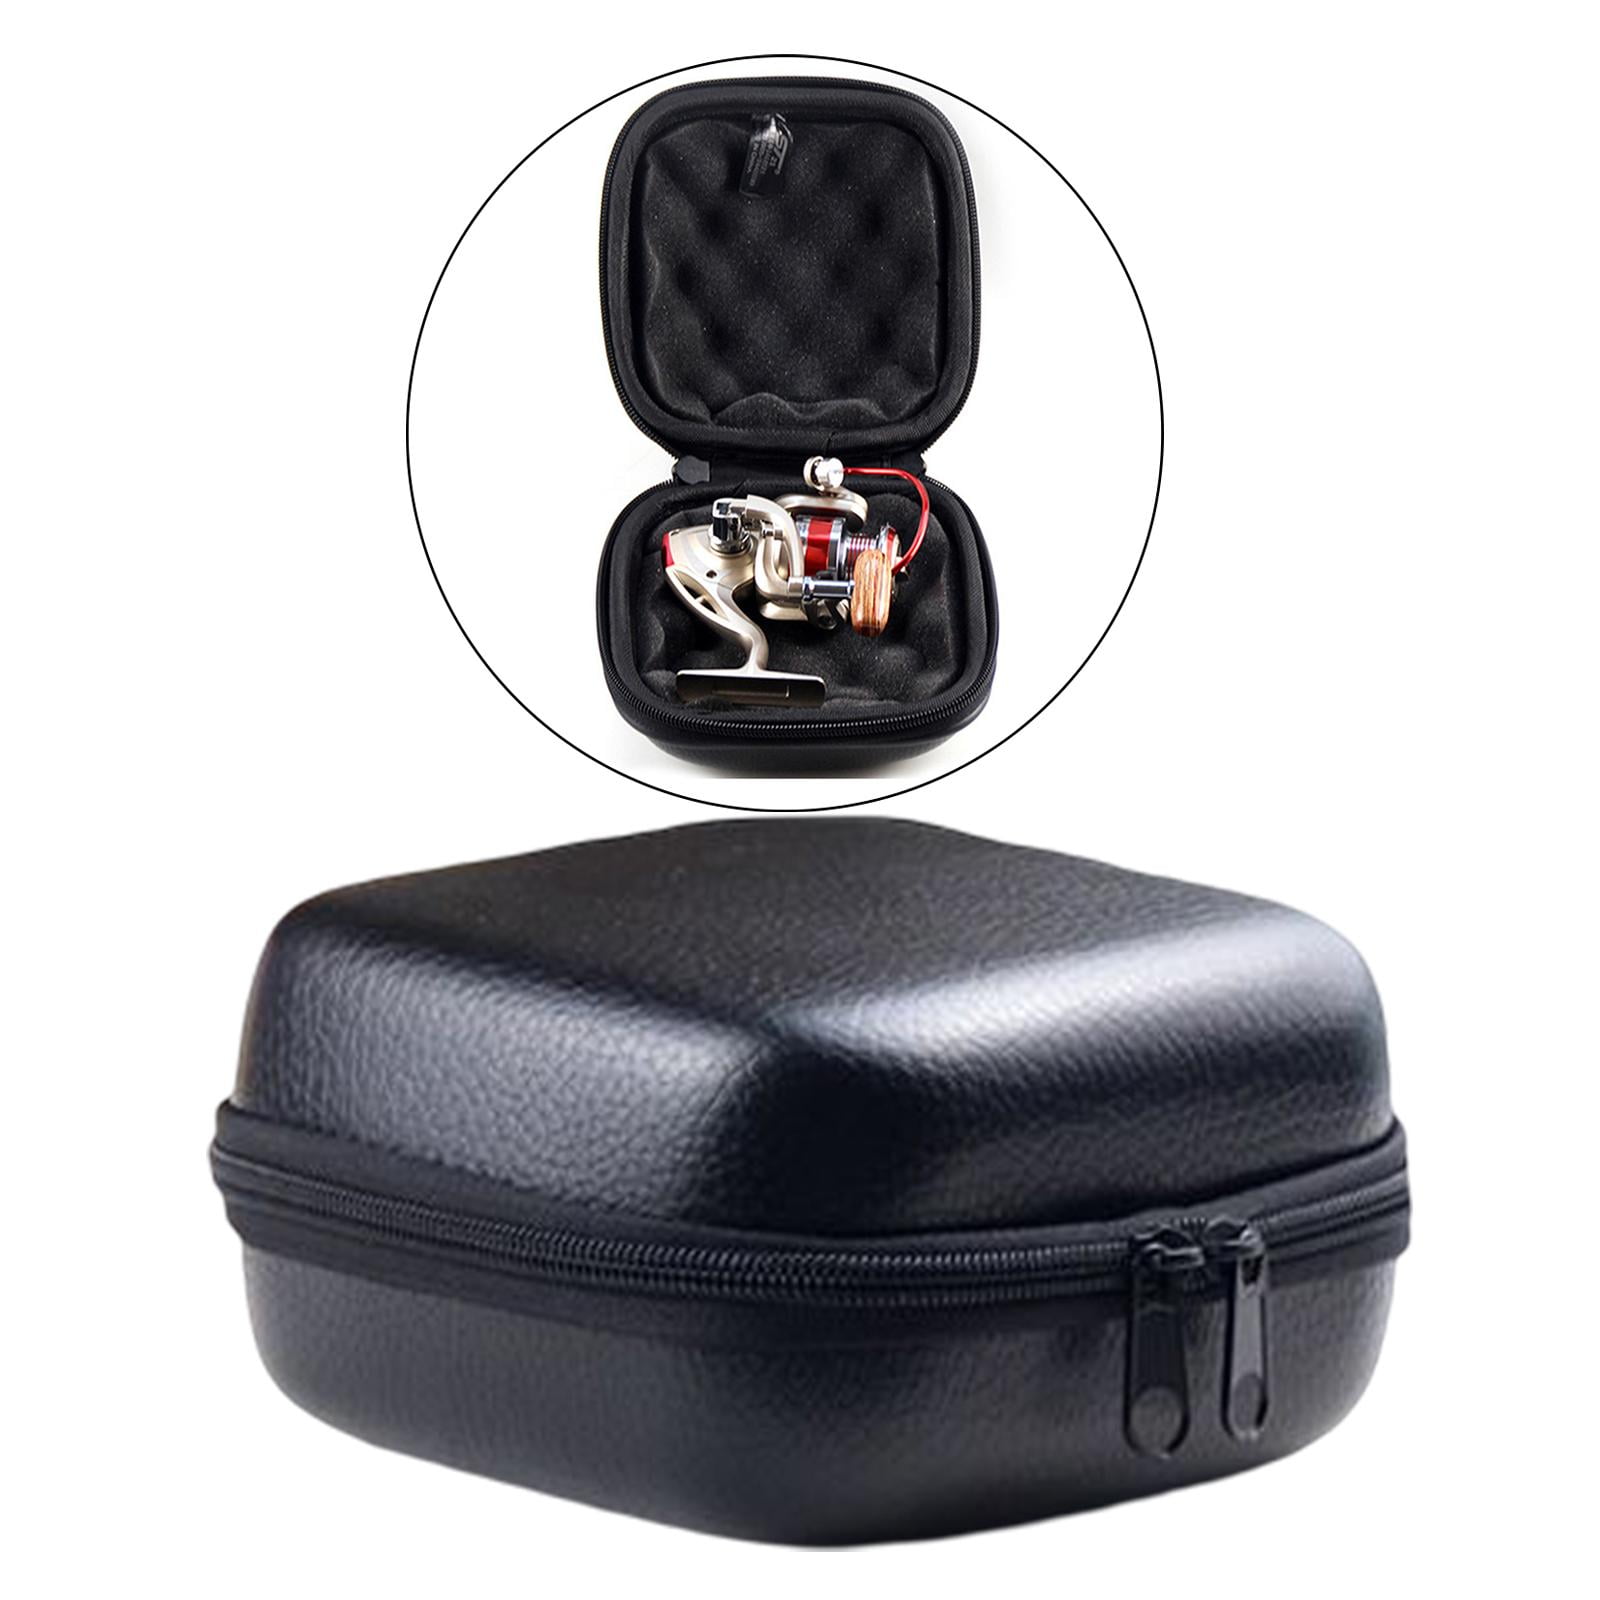 Outdoor Fishing Gear Storage Box Protective Cover Bag For Reel And Tackle,  Spinning And Casting Insta Reel View 26x24x12.5cm EV 230619 From Wai05,  $27.22